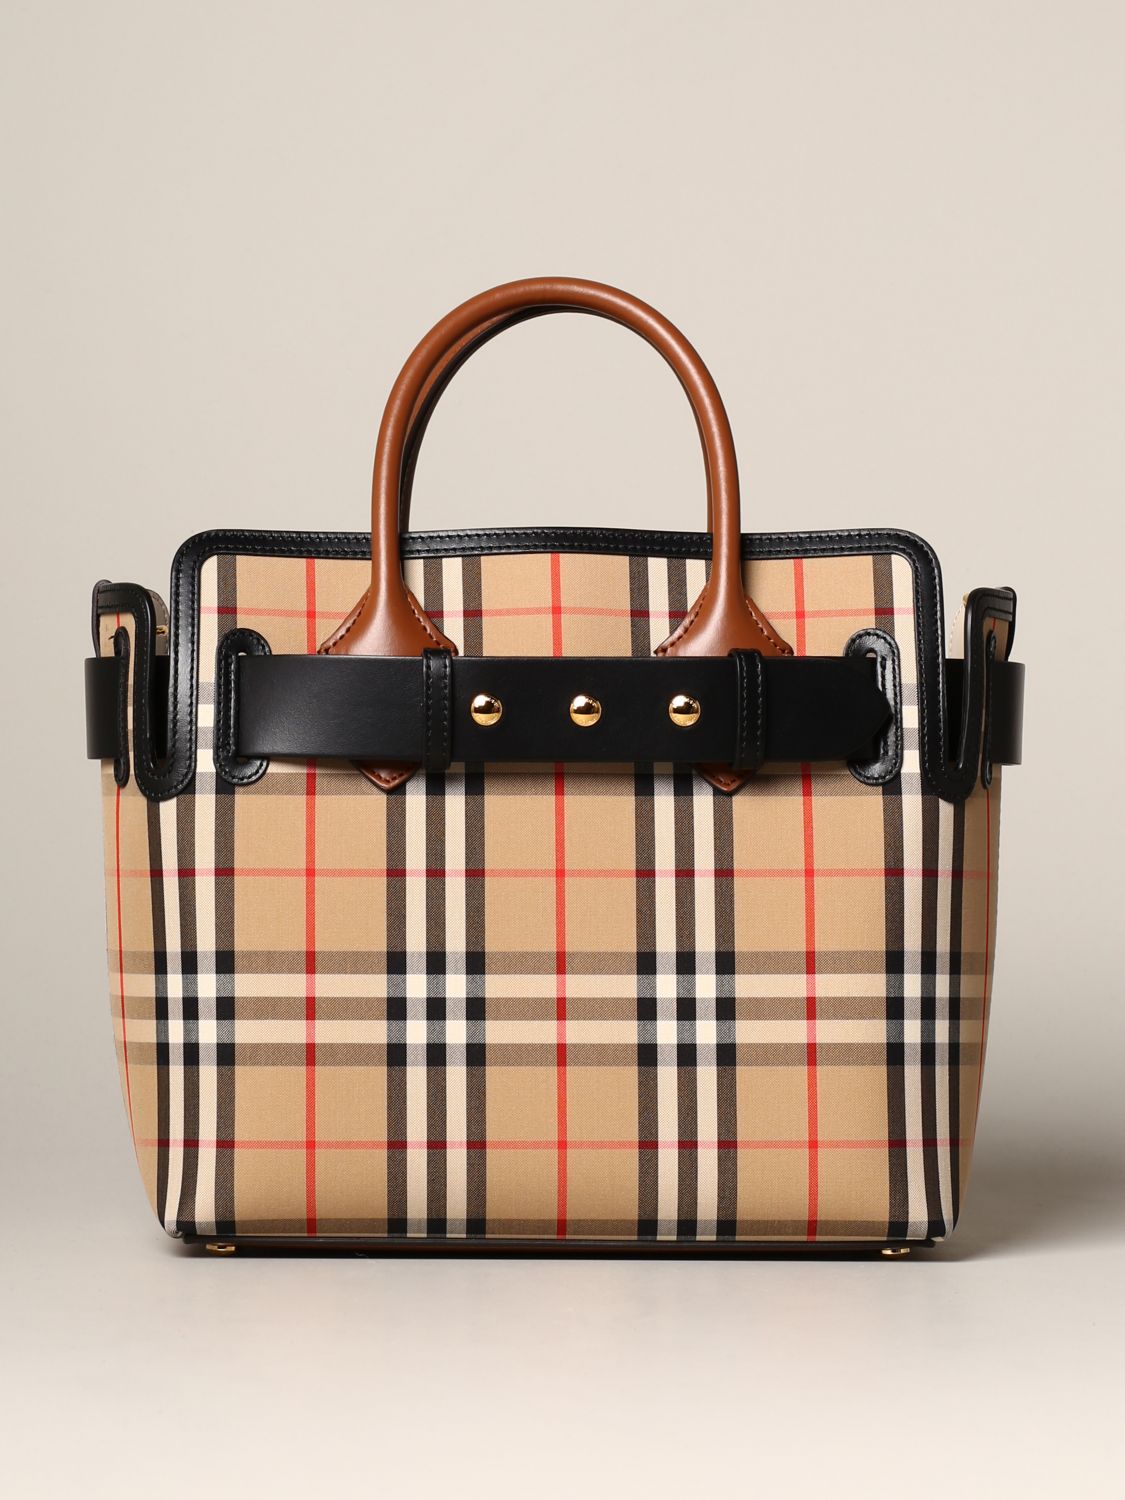 Burberry Outlet: handbag in check and leather Beige Burberry 8018790 online at GIGLIO.COM